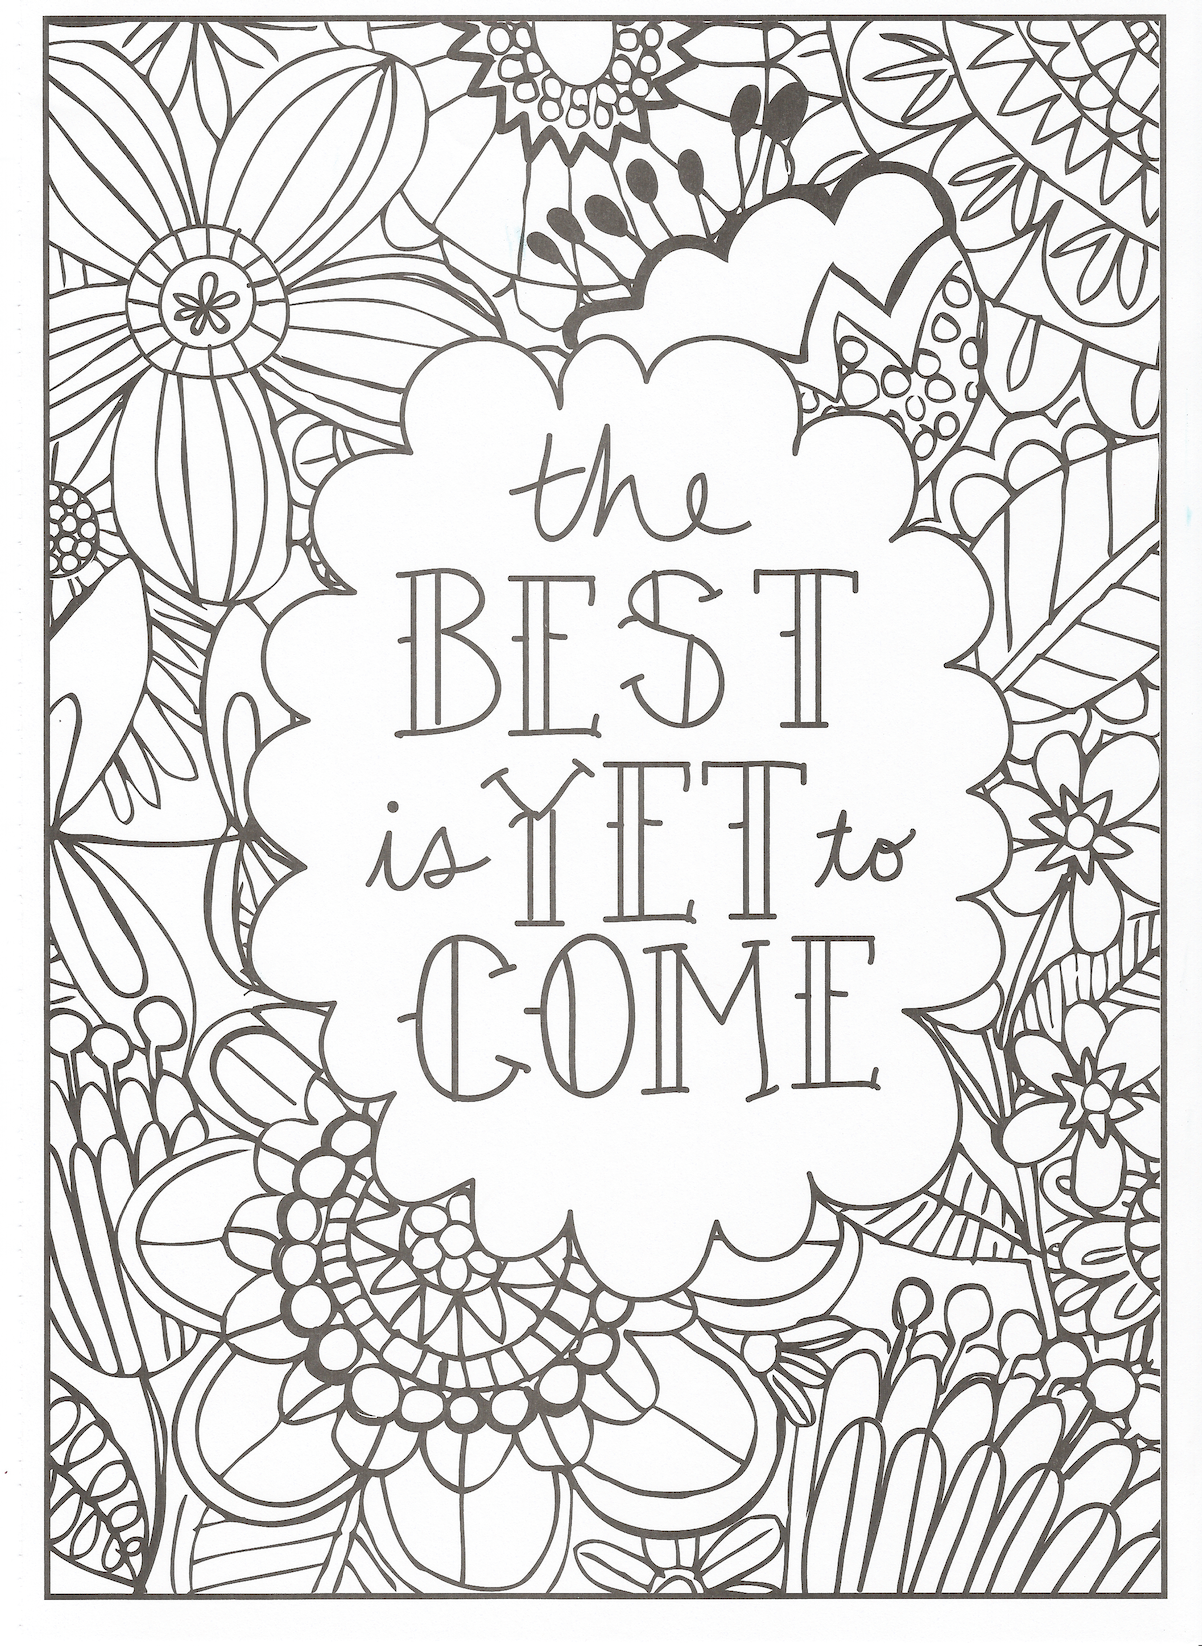 Timeless Creations Creative Quotes Coloring Page The 